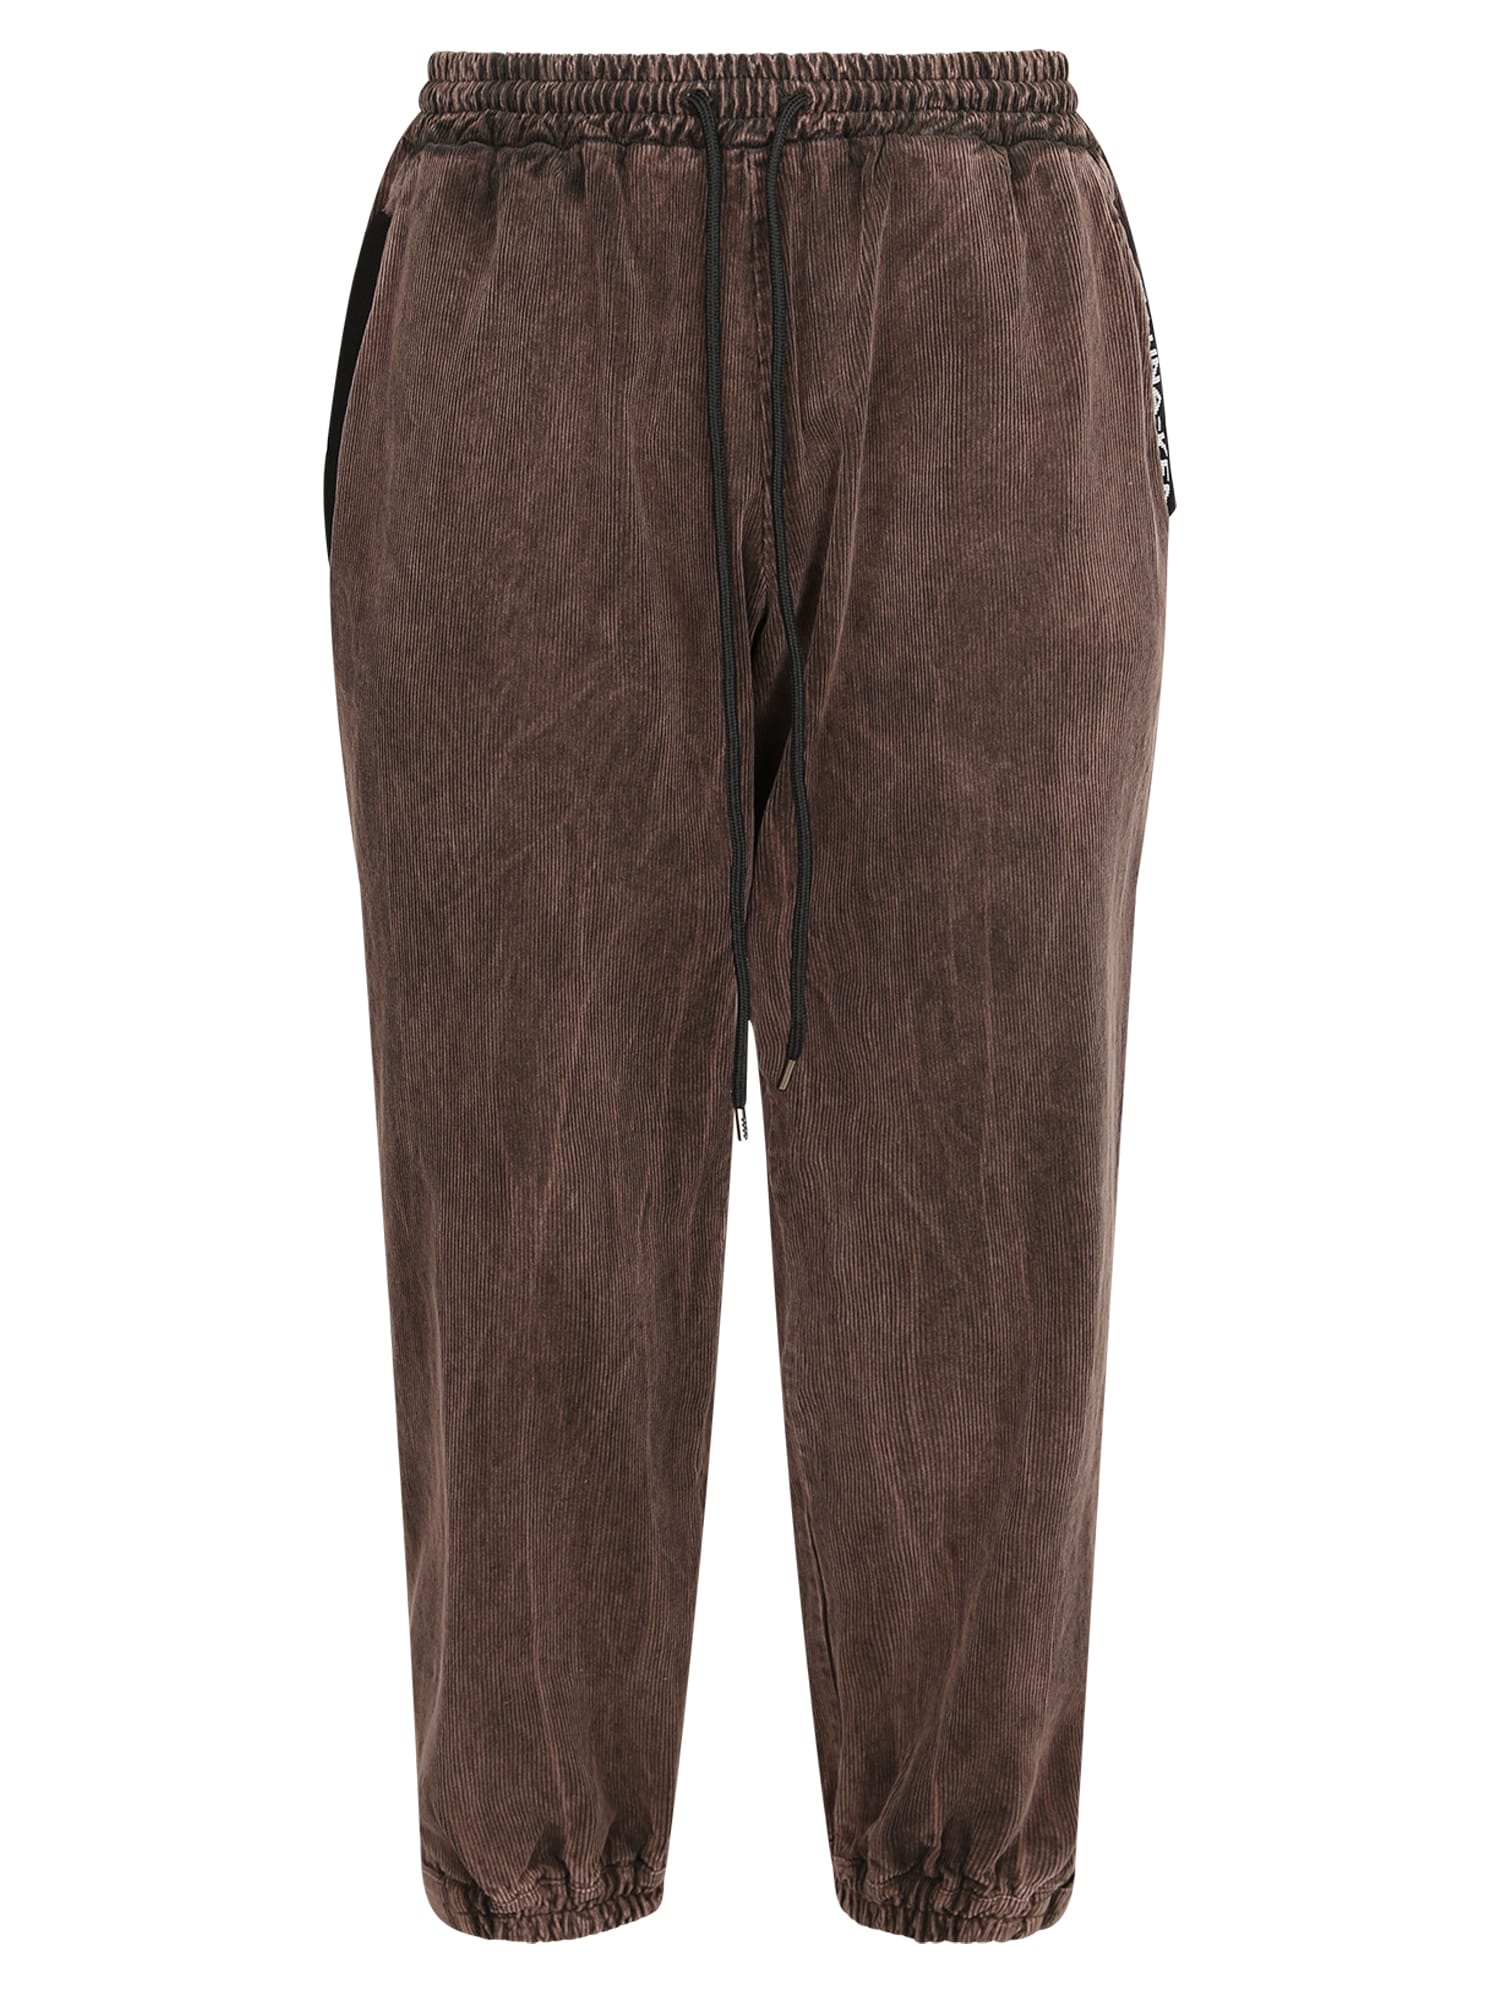 Mauna Kea Relaxed Fit Trousers